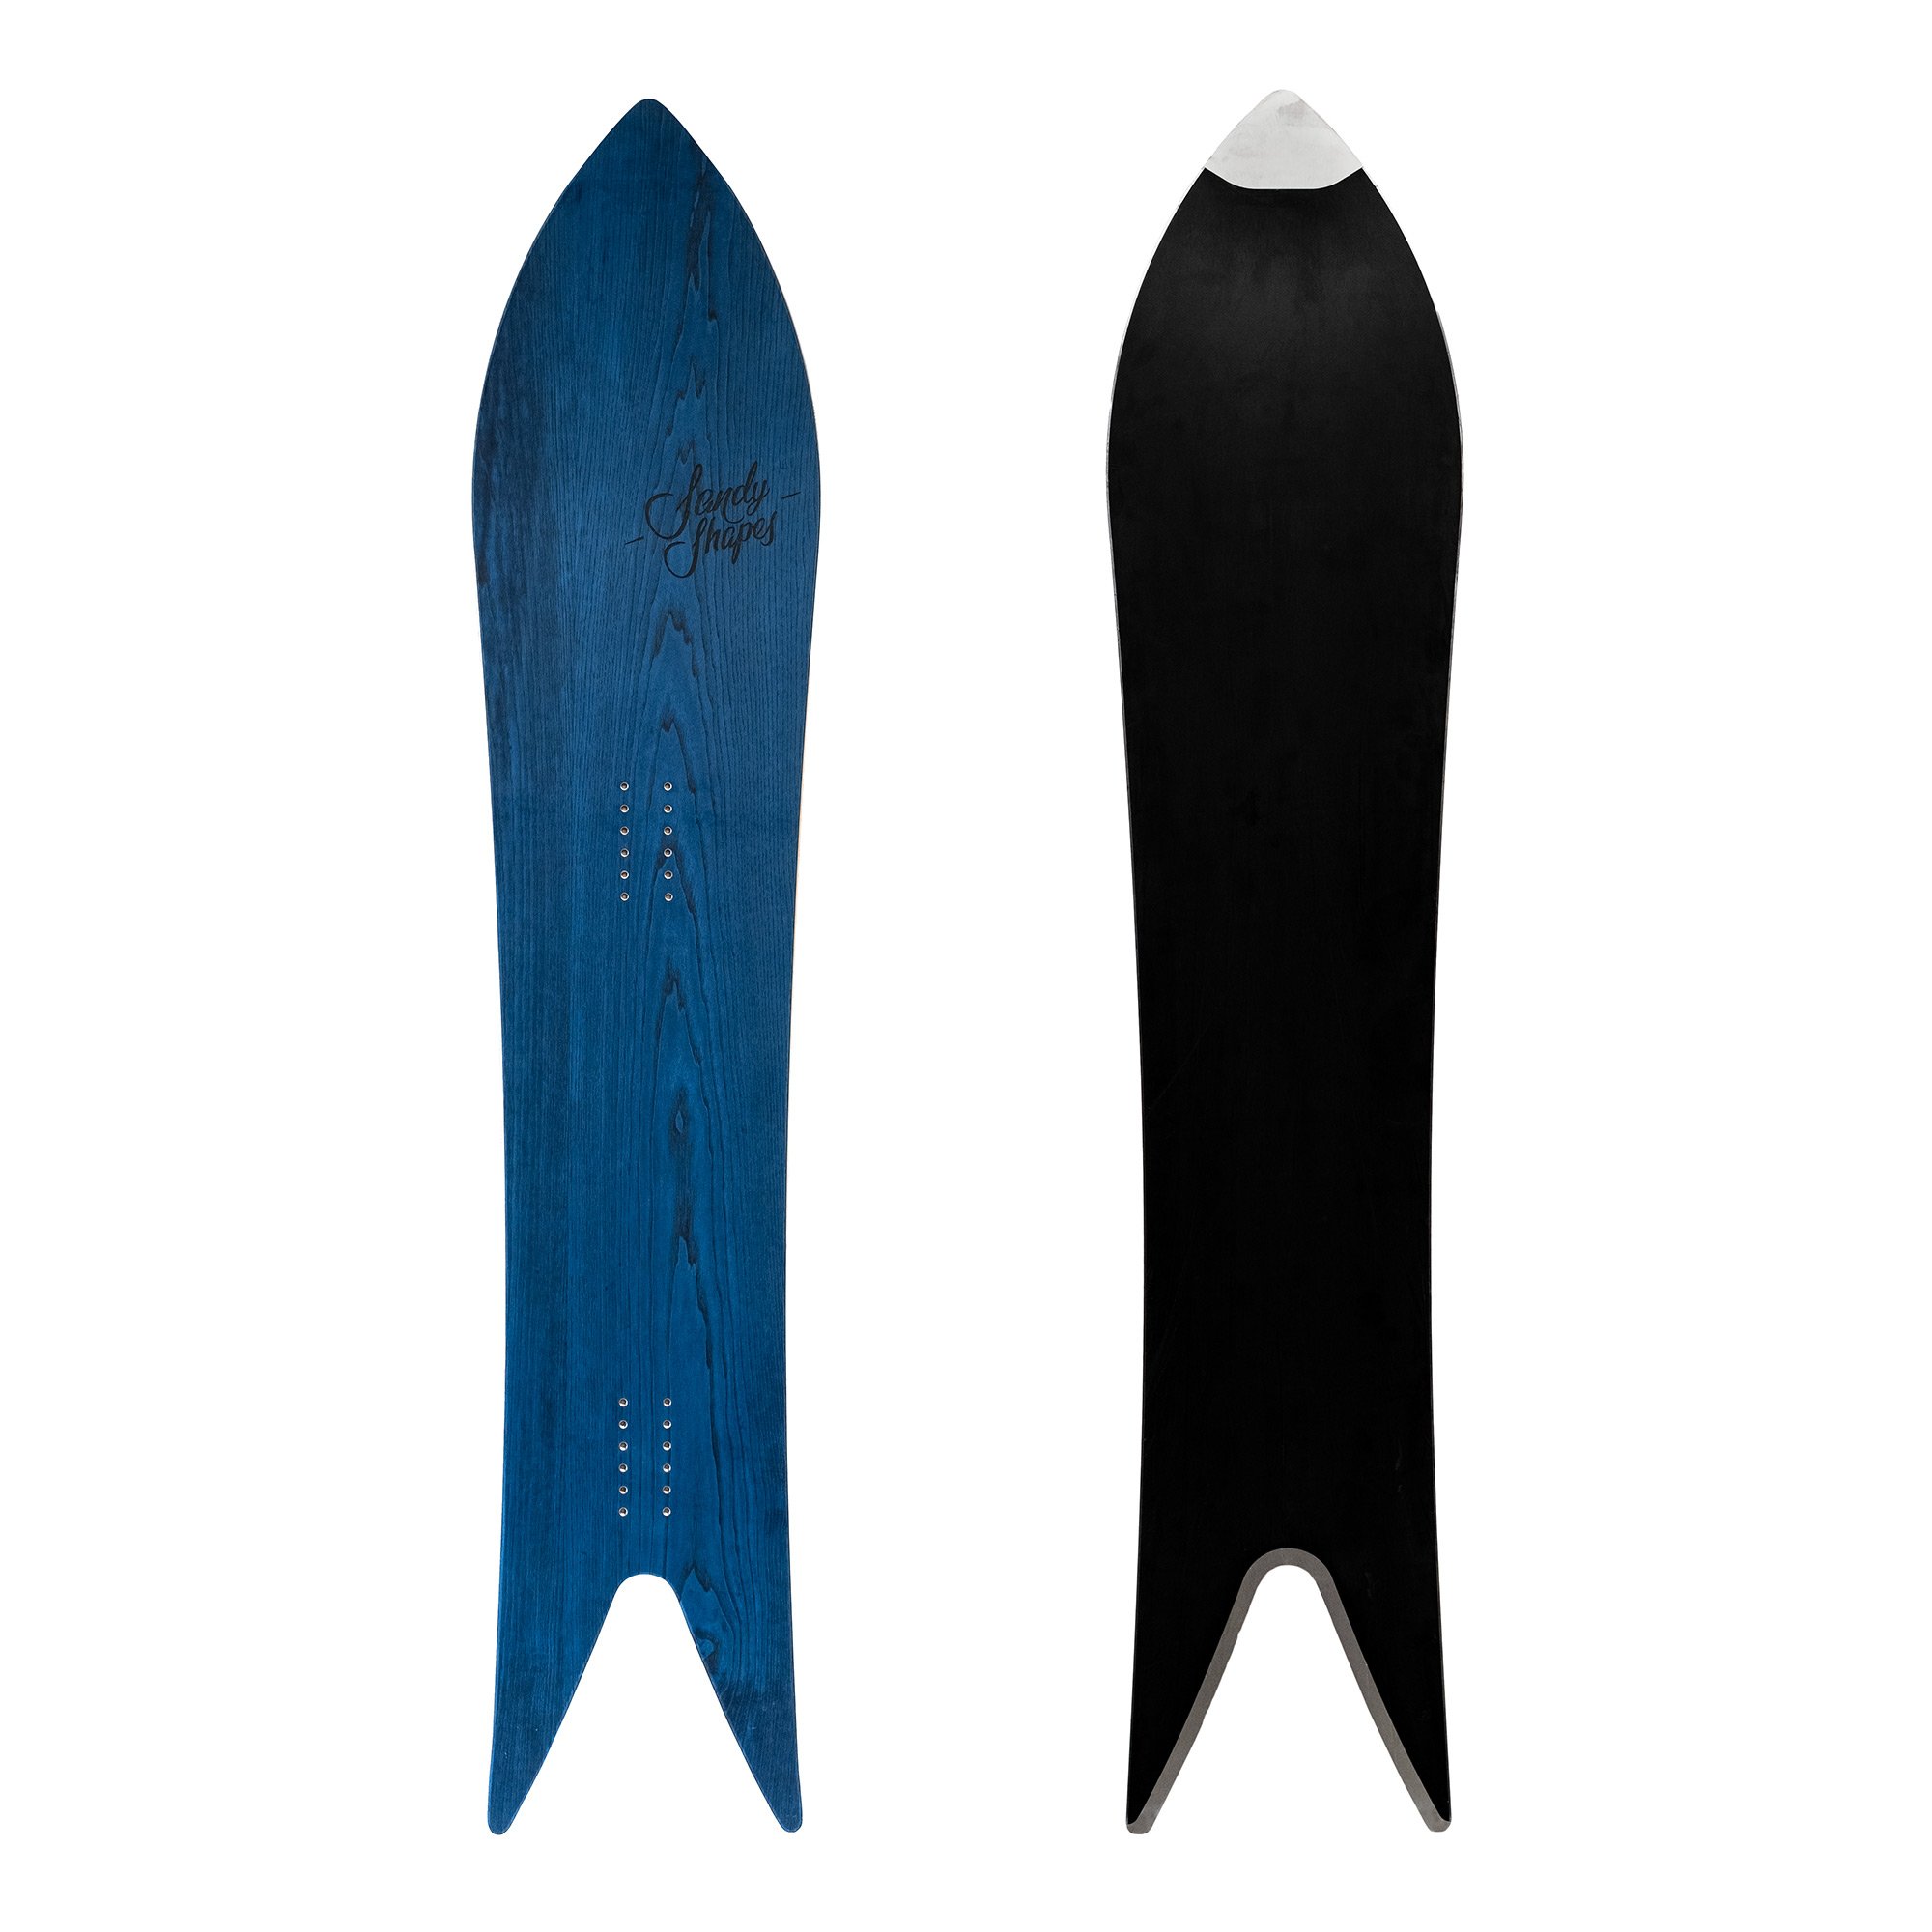 Sandy shapes Magnifica swallow-tail freeride snowboard in blue wood